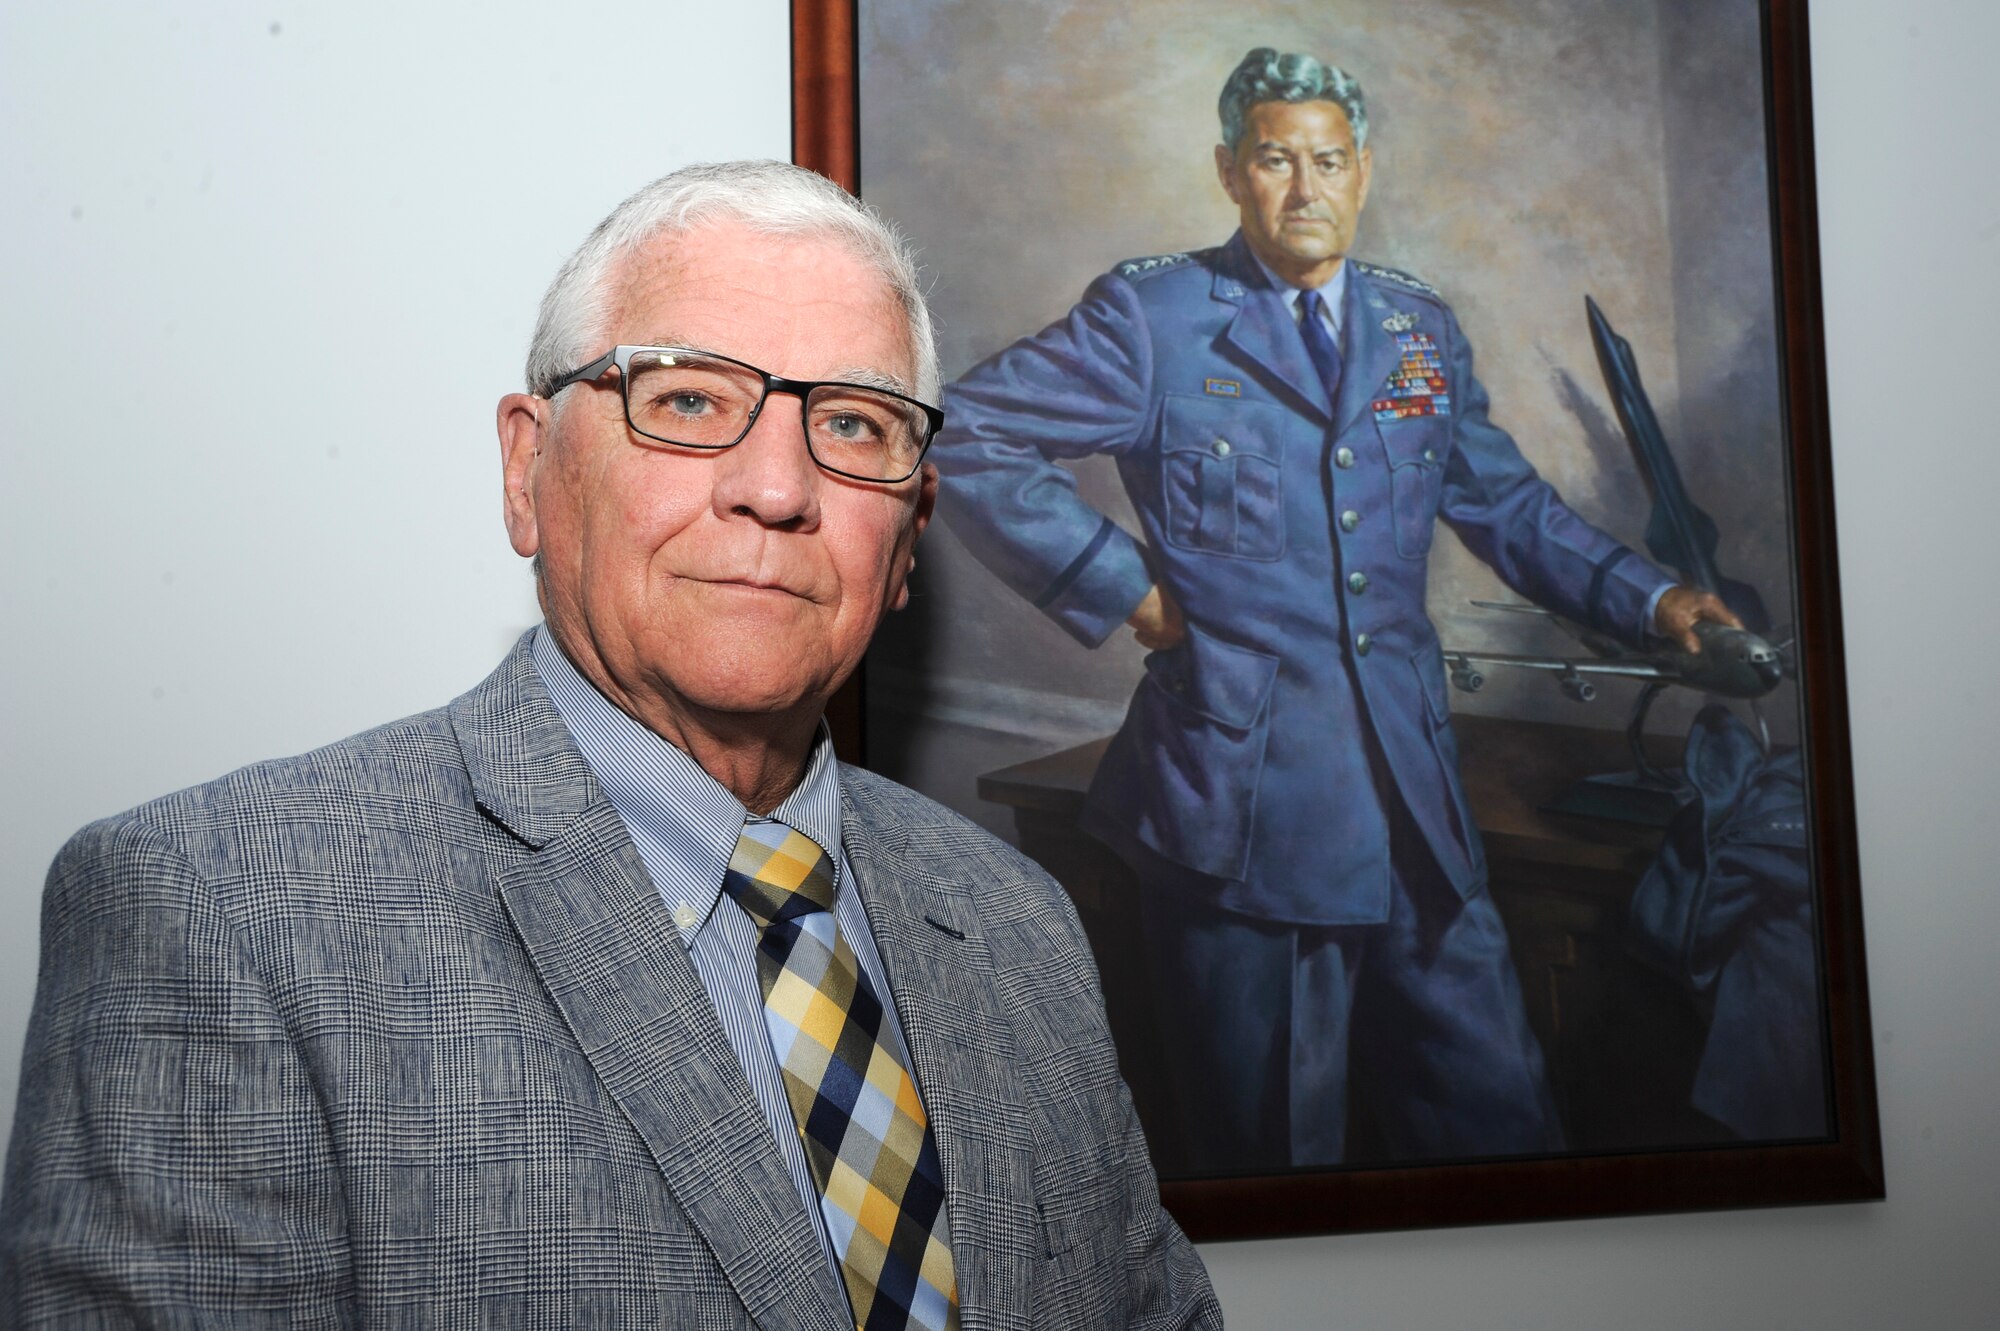 Retired Air Force Lt. Gen. Paul. K. Carlton Jr. poses in front of a portrait of family friend Gen. Curtis LeMay, April 21, 2016, Maxwell Air Force Base, Ala. The former Surgeon General of the Air Force visited Maxwell to share his thoughts with the Air War College Medical Elective students regarding Air Force history and culture. He spoke about what to do when an order is given that doesn’t meet with the Air Force’s moral standards and how to respond. He also gave insight on his friendship with LeMay. Carlton’s father, General Paul K. Carlton Sr. was LeMay’s aid from 1949-1953 and the two families became good friends. Carlton reminisced about fond memories he had with LeMay, such as when he wrote his recommendation letter for the Air Force Academy and gave his children shooting lessons in 1982. Carlton said that he hopes that if anyone remembers anything about LeMay it’s that he was a dedicated warrior. (U.S. Air Force photo/Airman 1st Class Alexa Culbert)